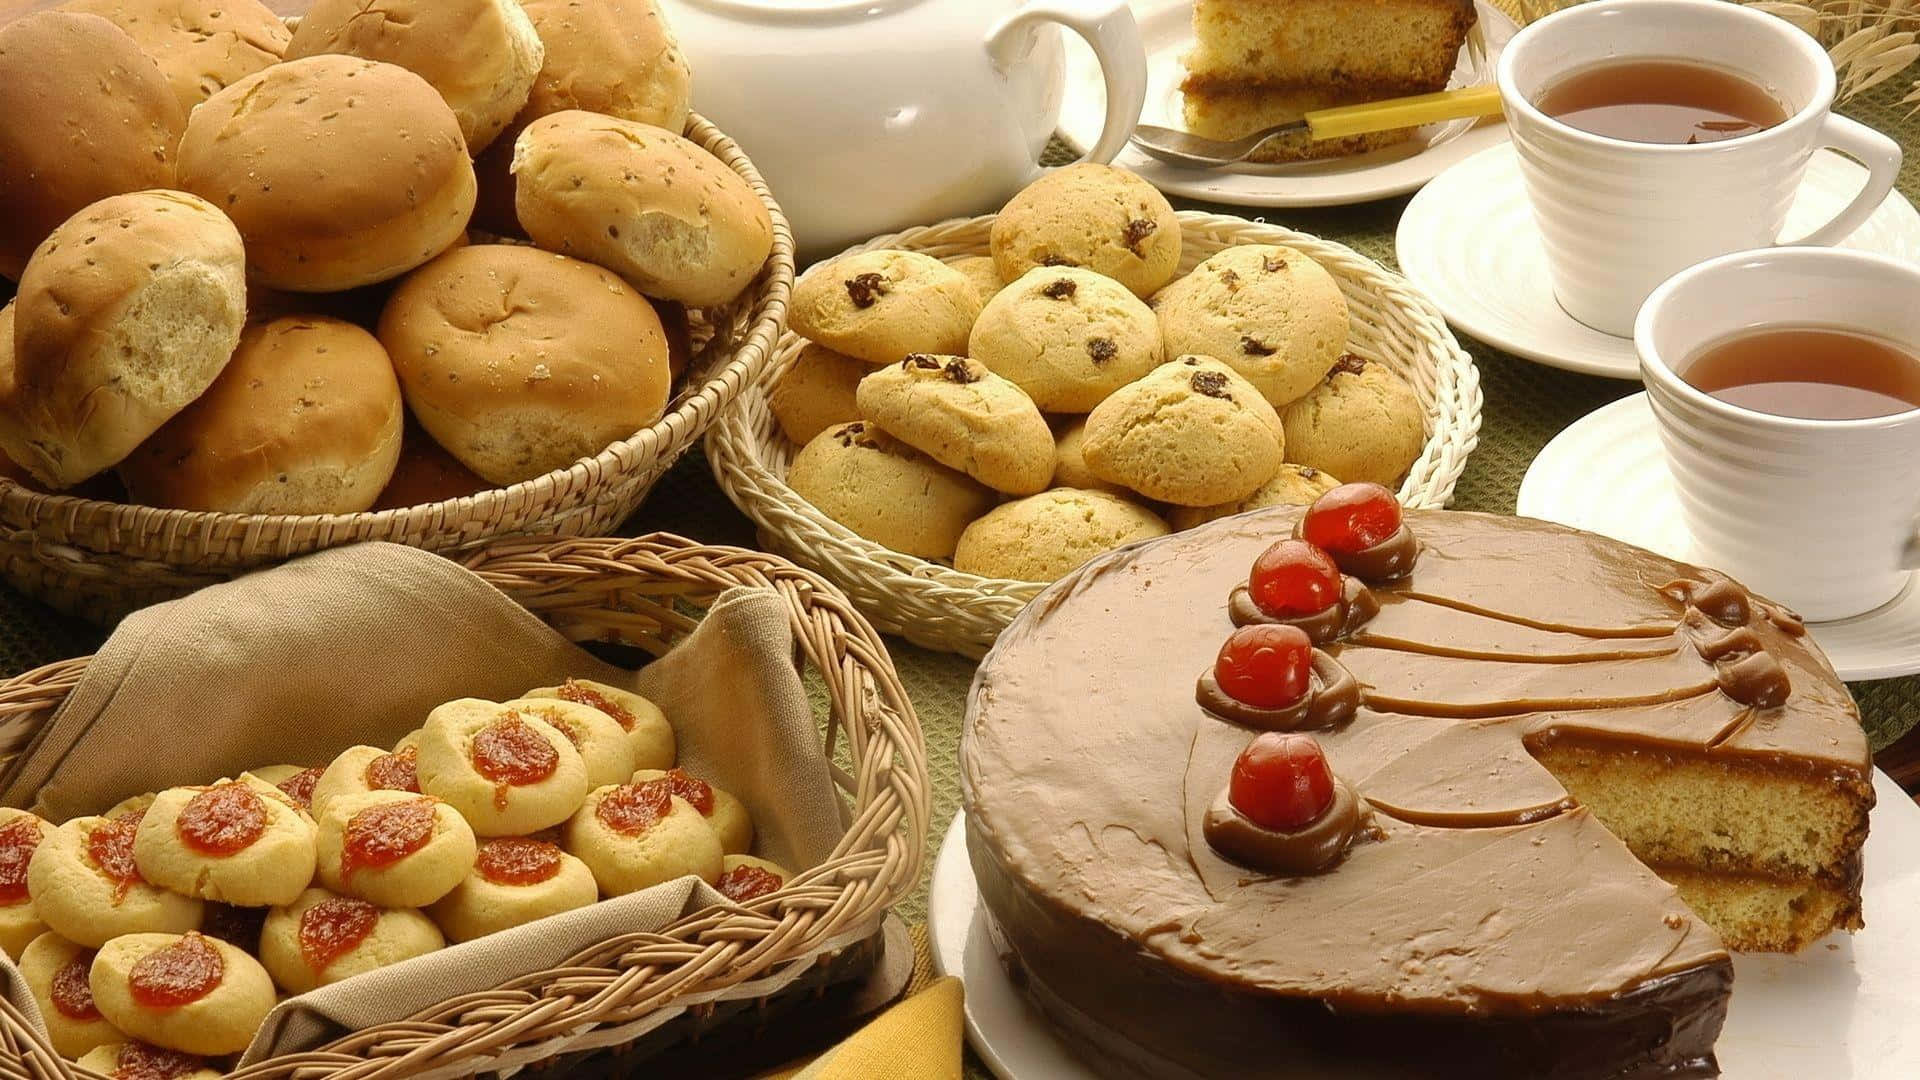 Tempting array of delectable pastries